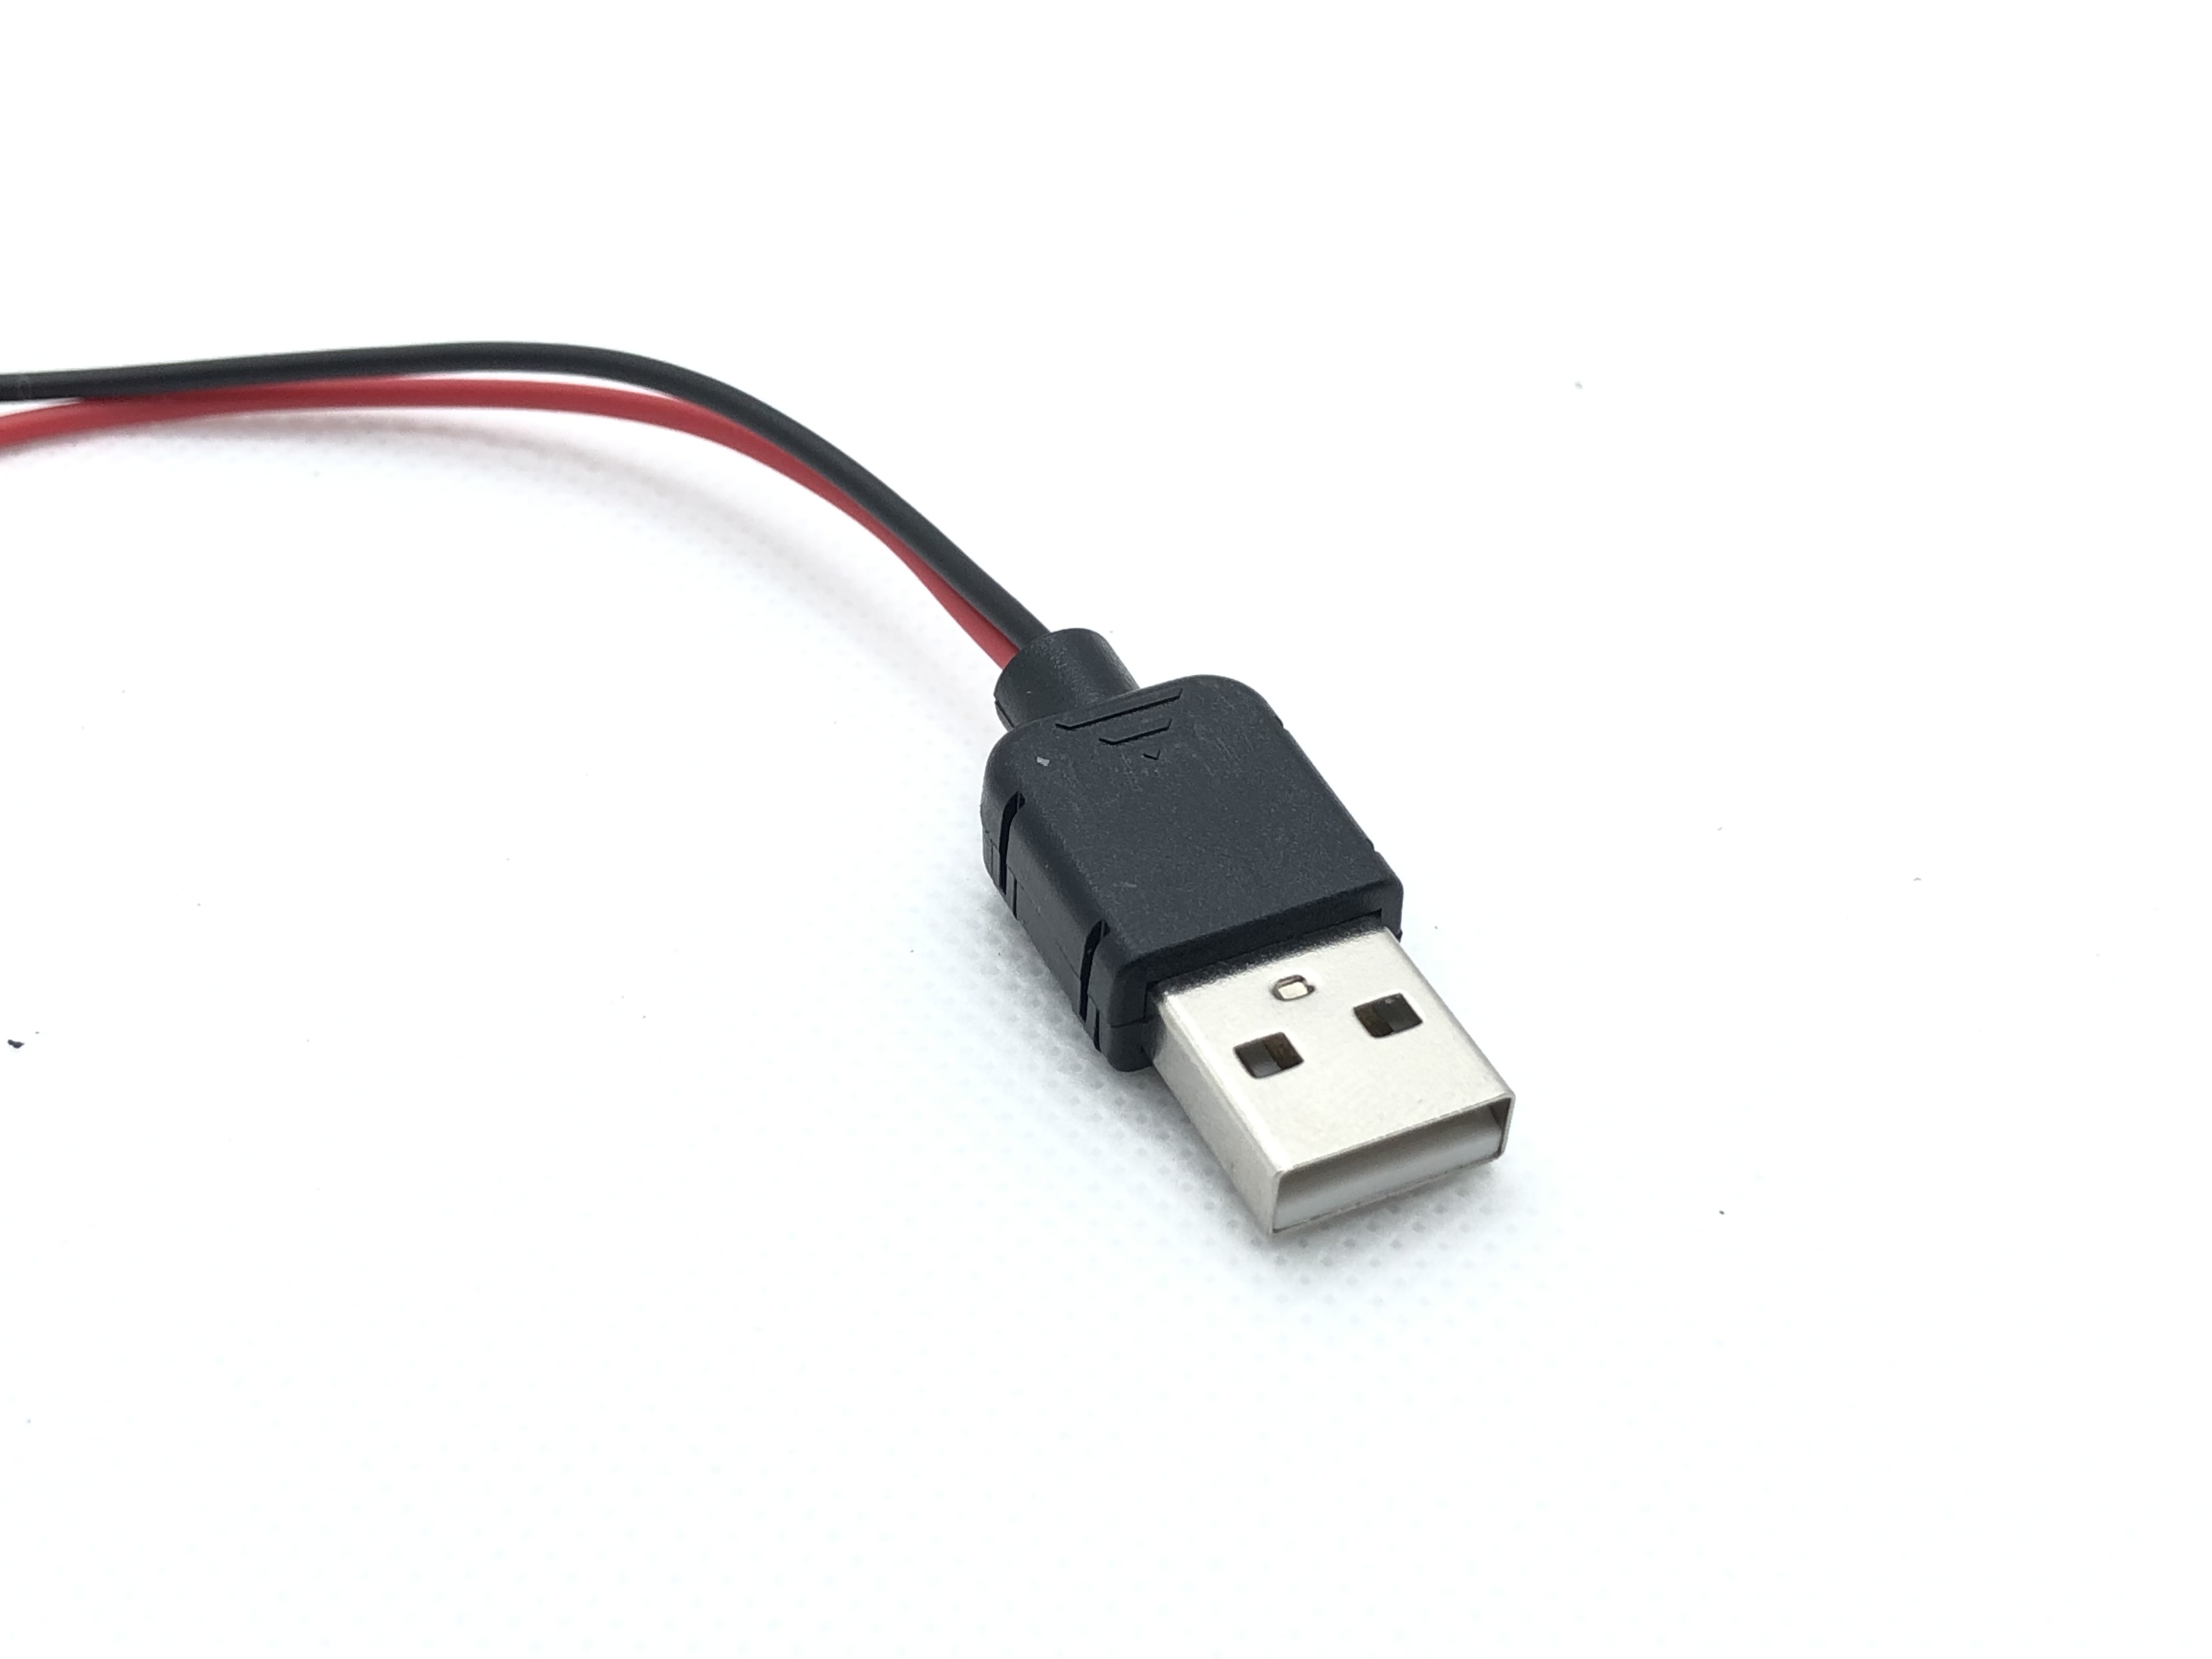 USB cover